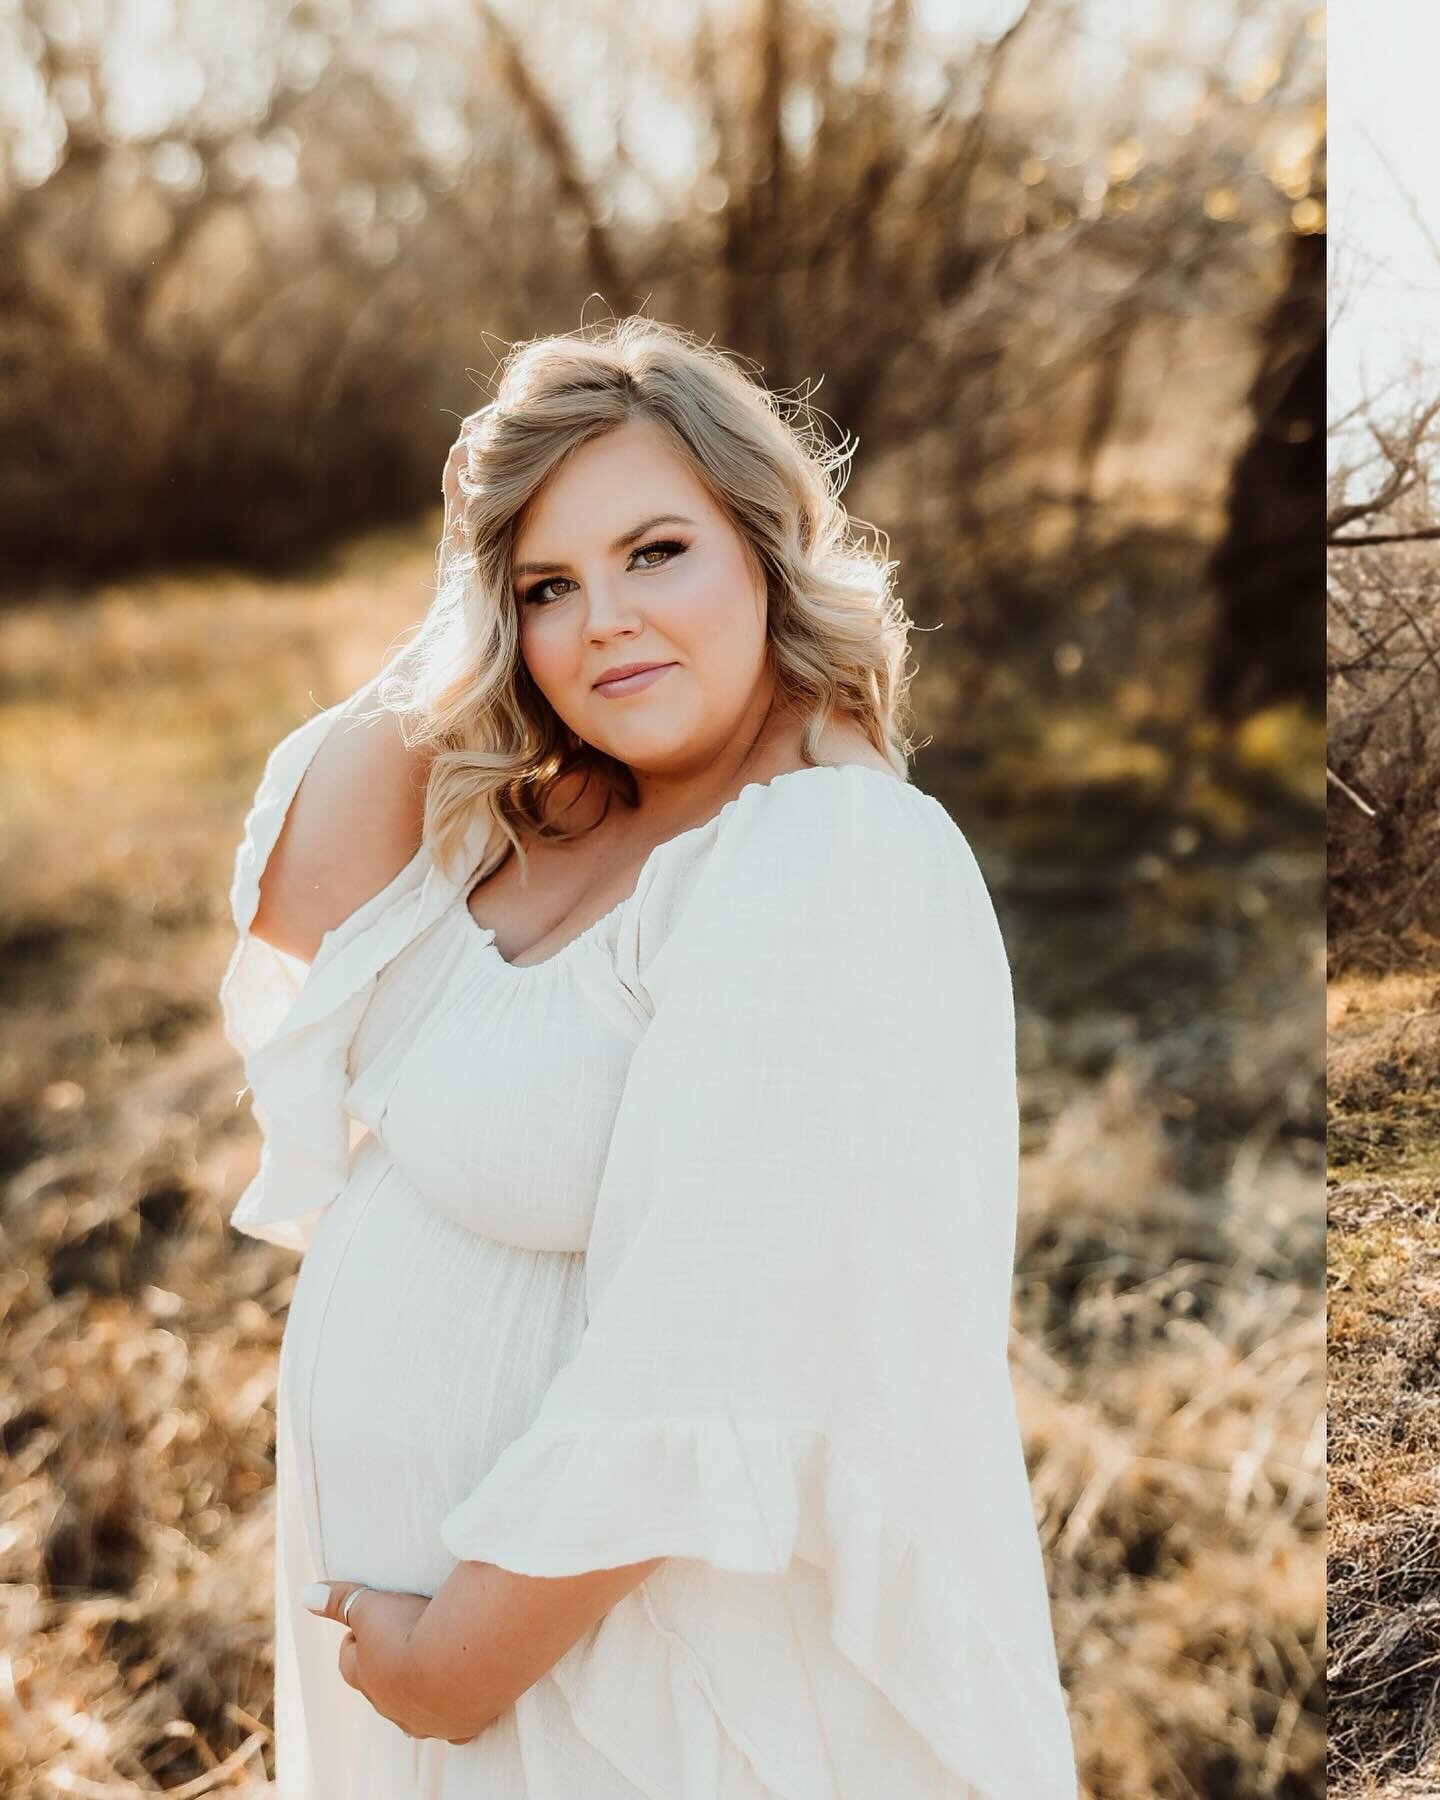 Spring bringing new life, new beginnings, and soooo much happiness!!! Can&rsquo;t wait to meet @_lissaaan11 little baby💕
@_lissaaan11 you are GORGEOUS and @_createdconfidence_ knocked it out of the park with this makeup look!!!